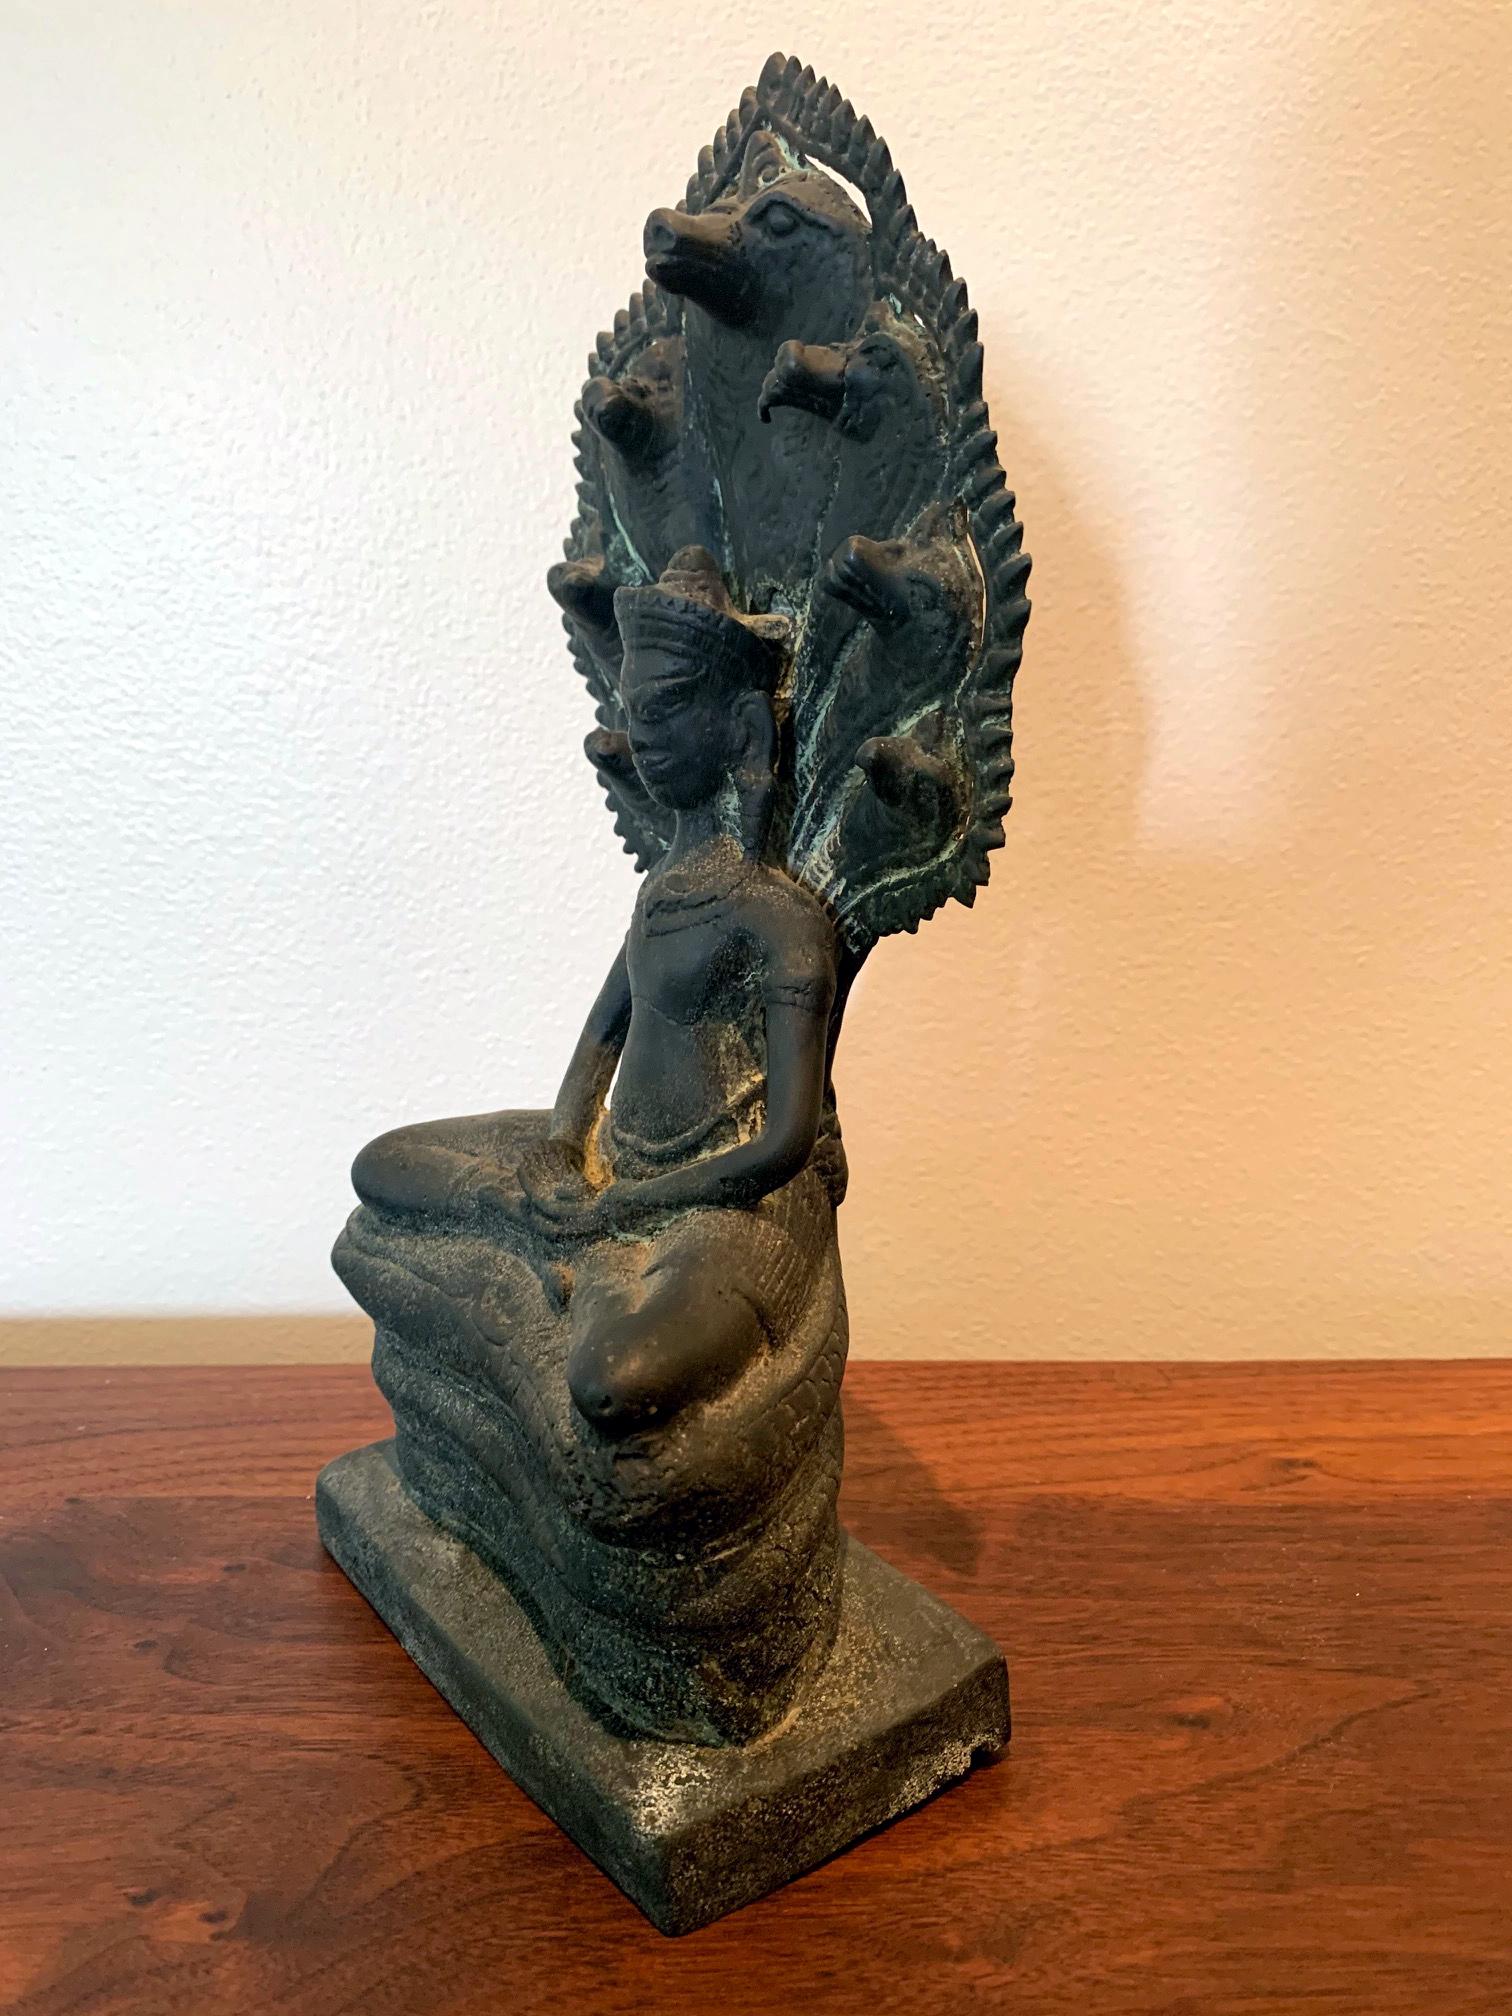 A cast bronze statue of Buddha in deep mediation on a throne and canopy formed by Mucalinda Naga, a multi-head serpent like creature. The statue depicts the legend that four weeks after Gautama Buddha began meditating under the Bodhi Tree, the